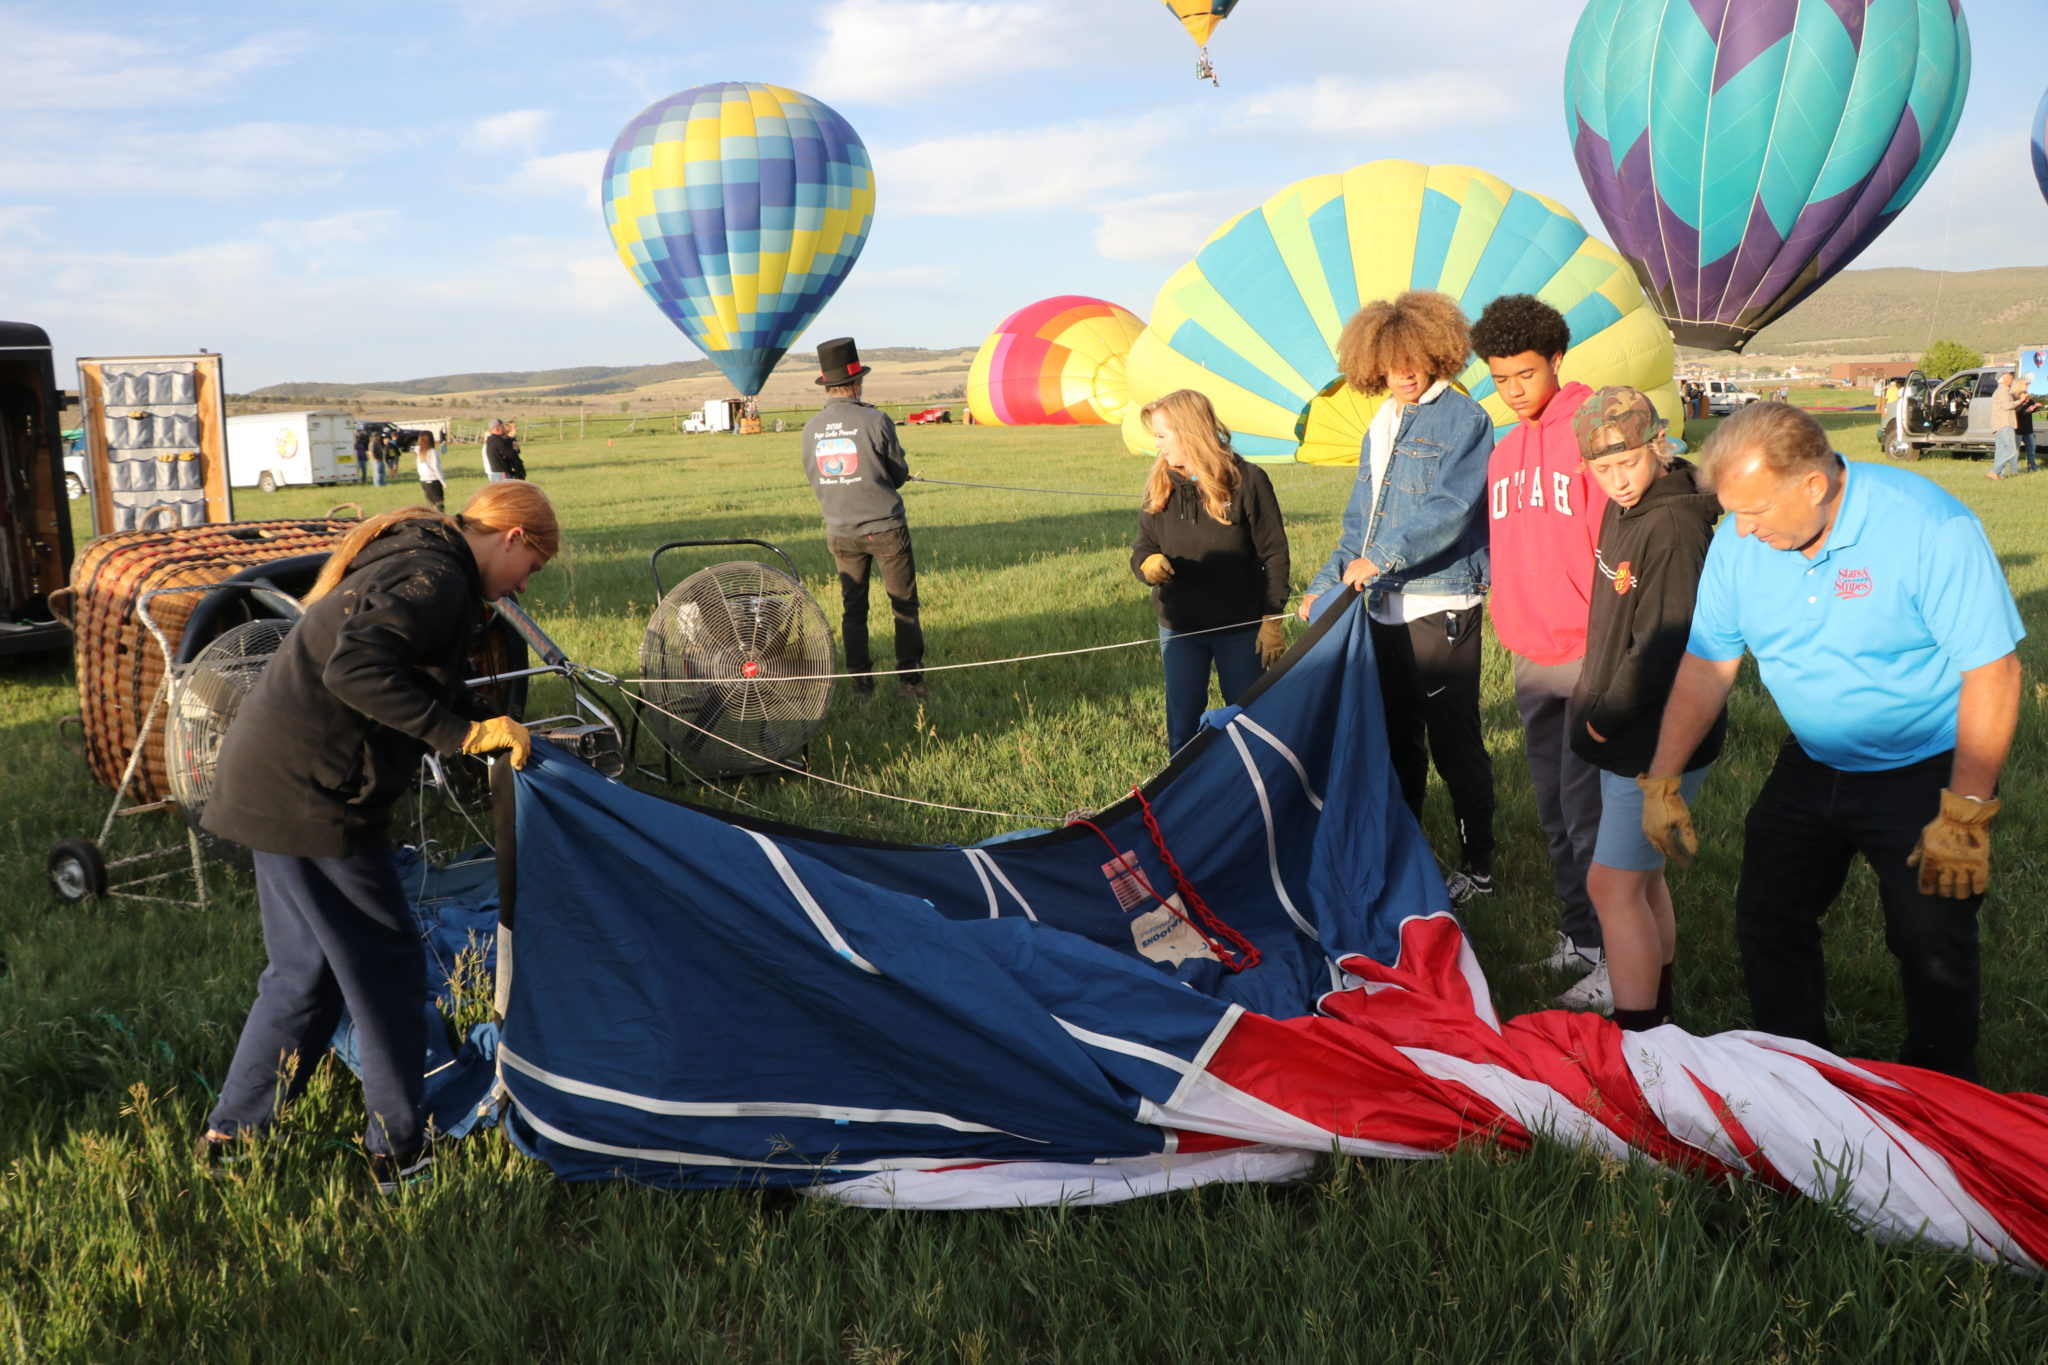 Morning launch of 30 hot air balloons kicks off annual Panguitch Valley